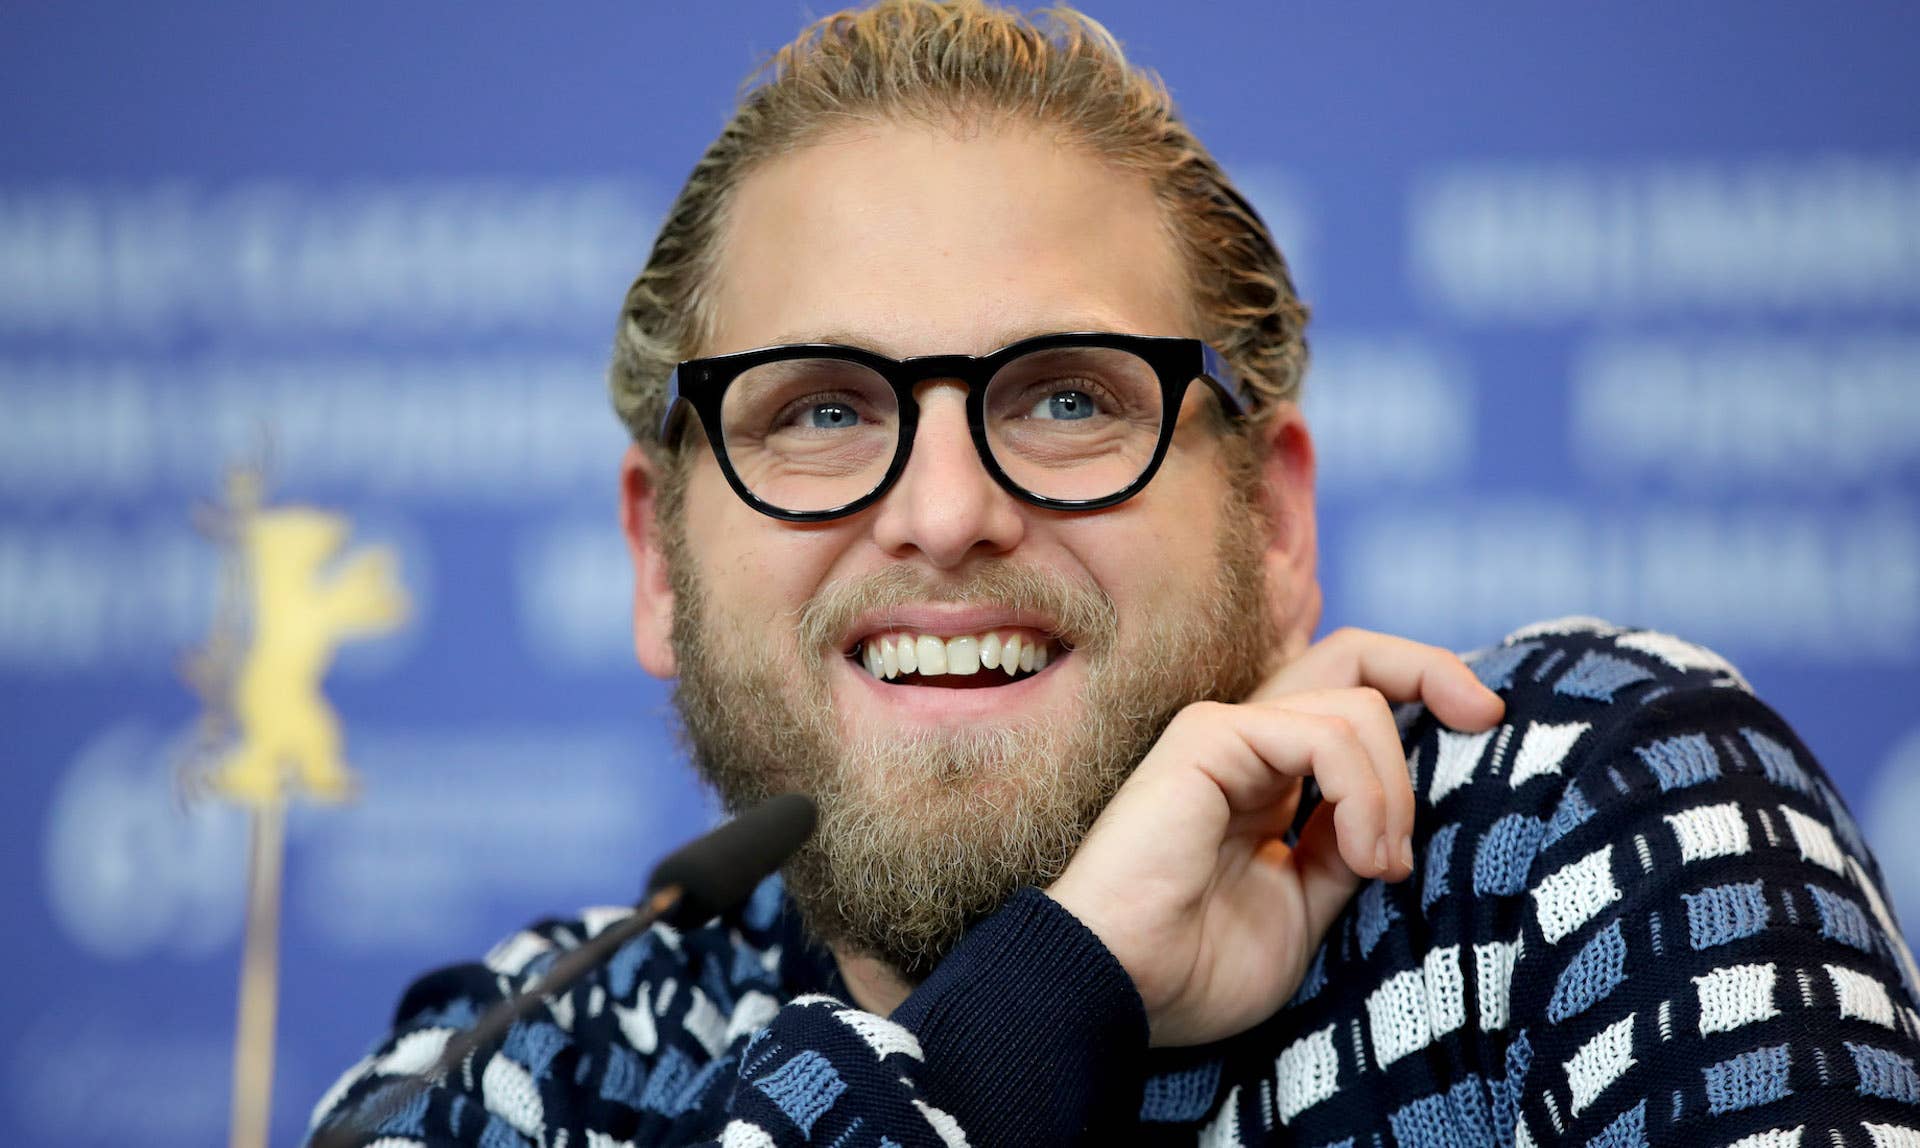 Jonah Hill attends press conference for 2020 film 'Mid '90s